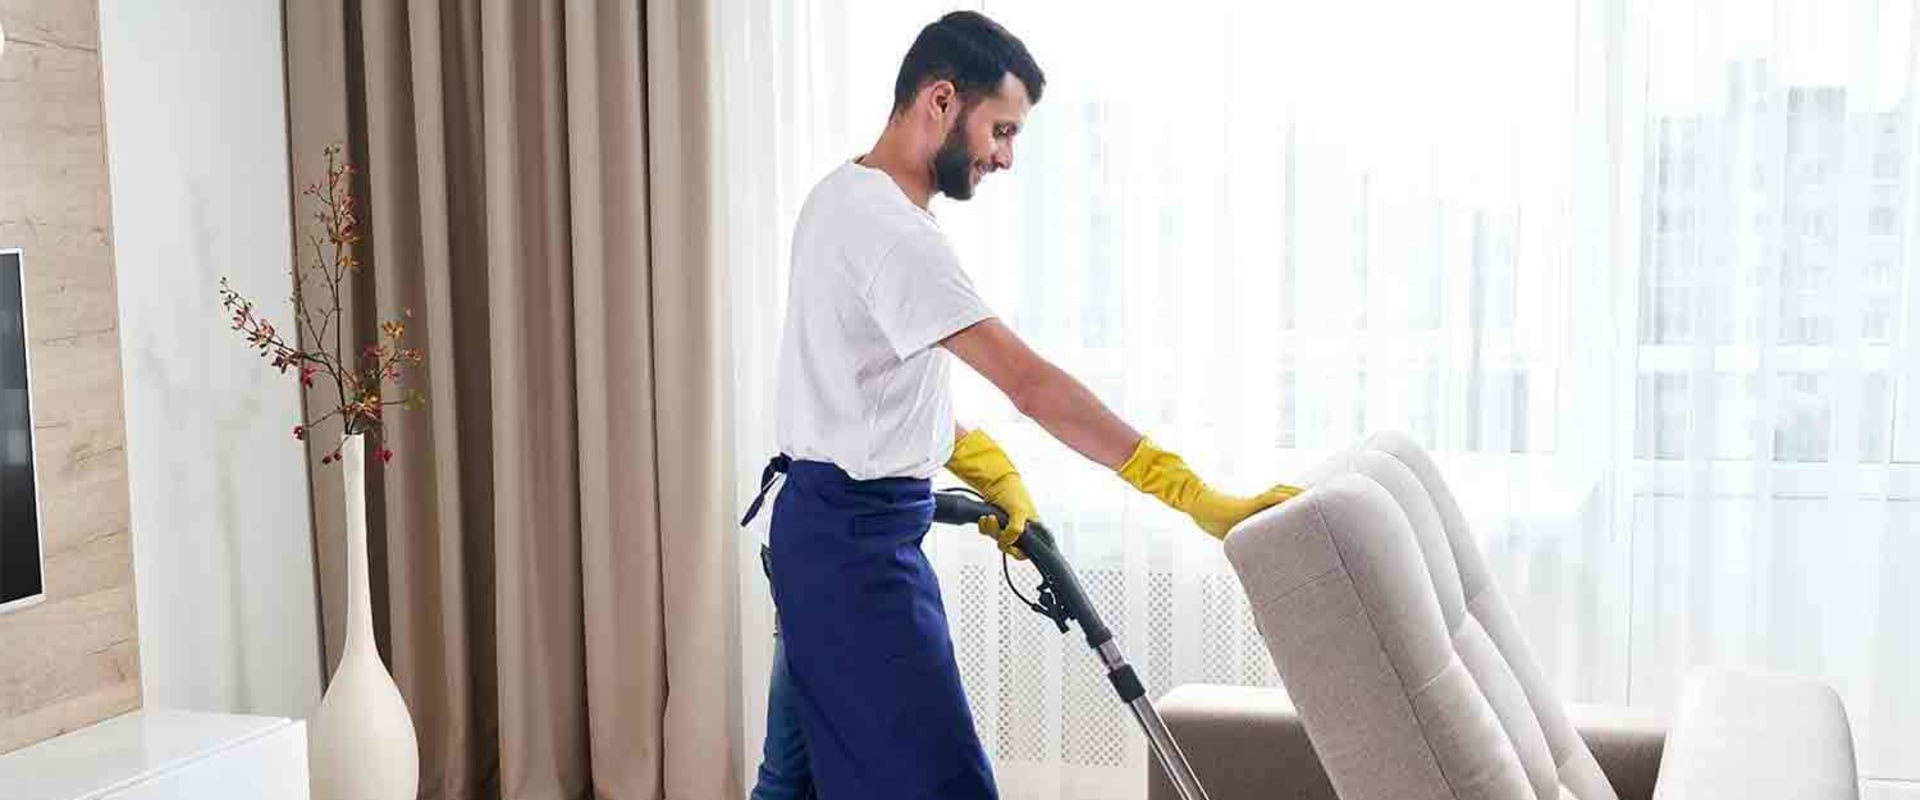 The Smart Sequence: Carpet Cleaning In Evansville, IN, Before Hiring A Maid Service